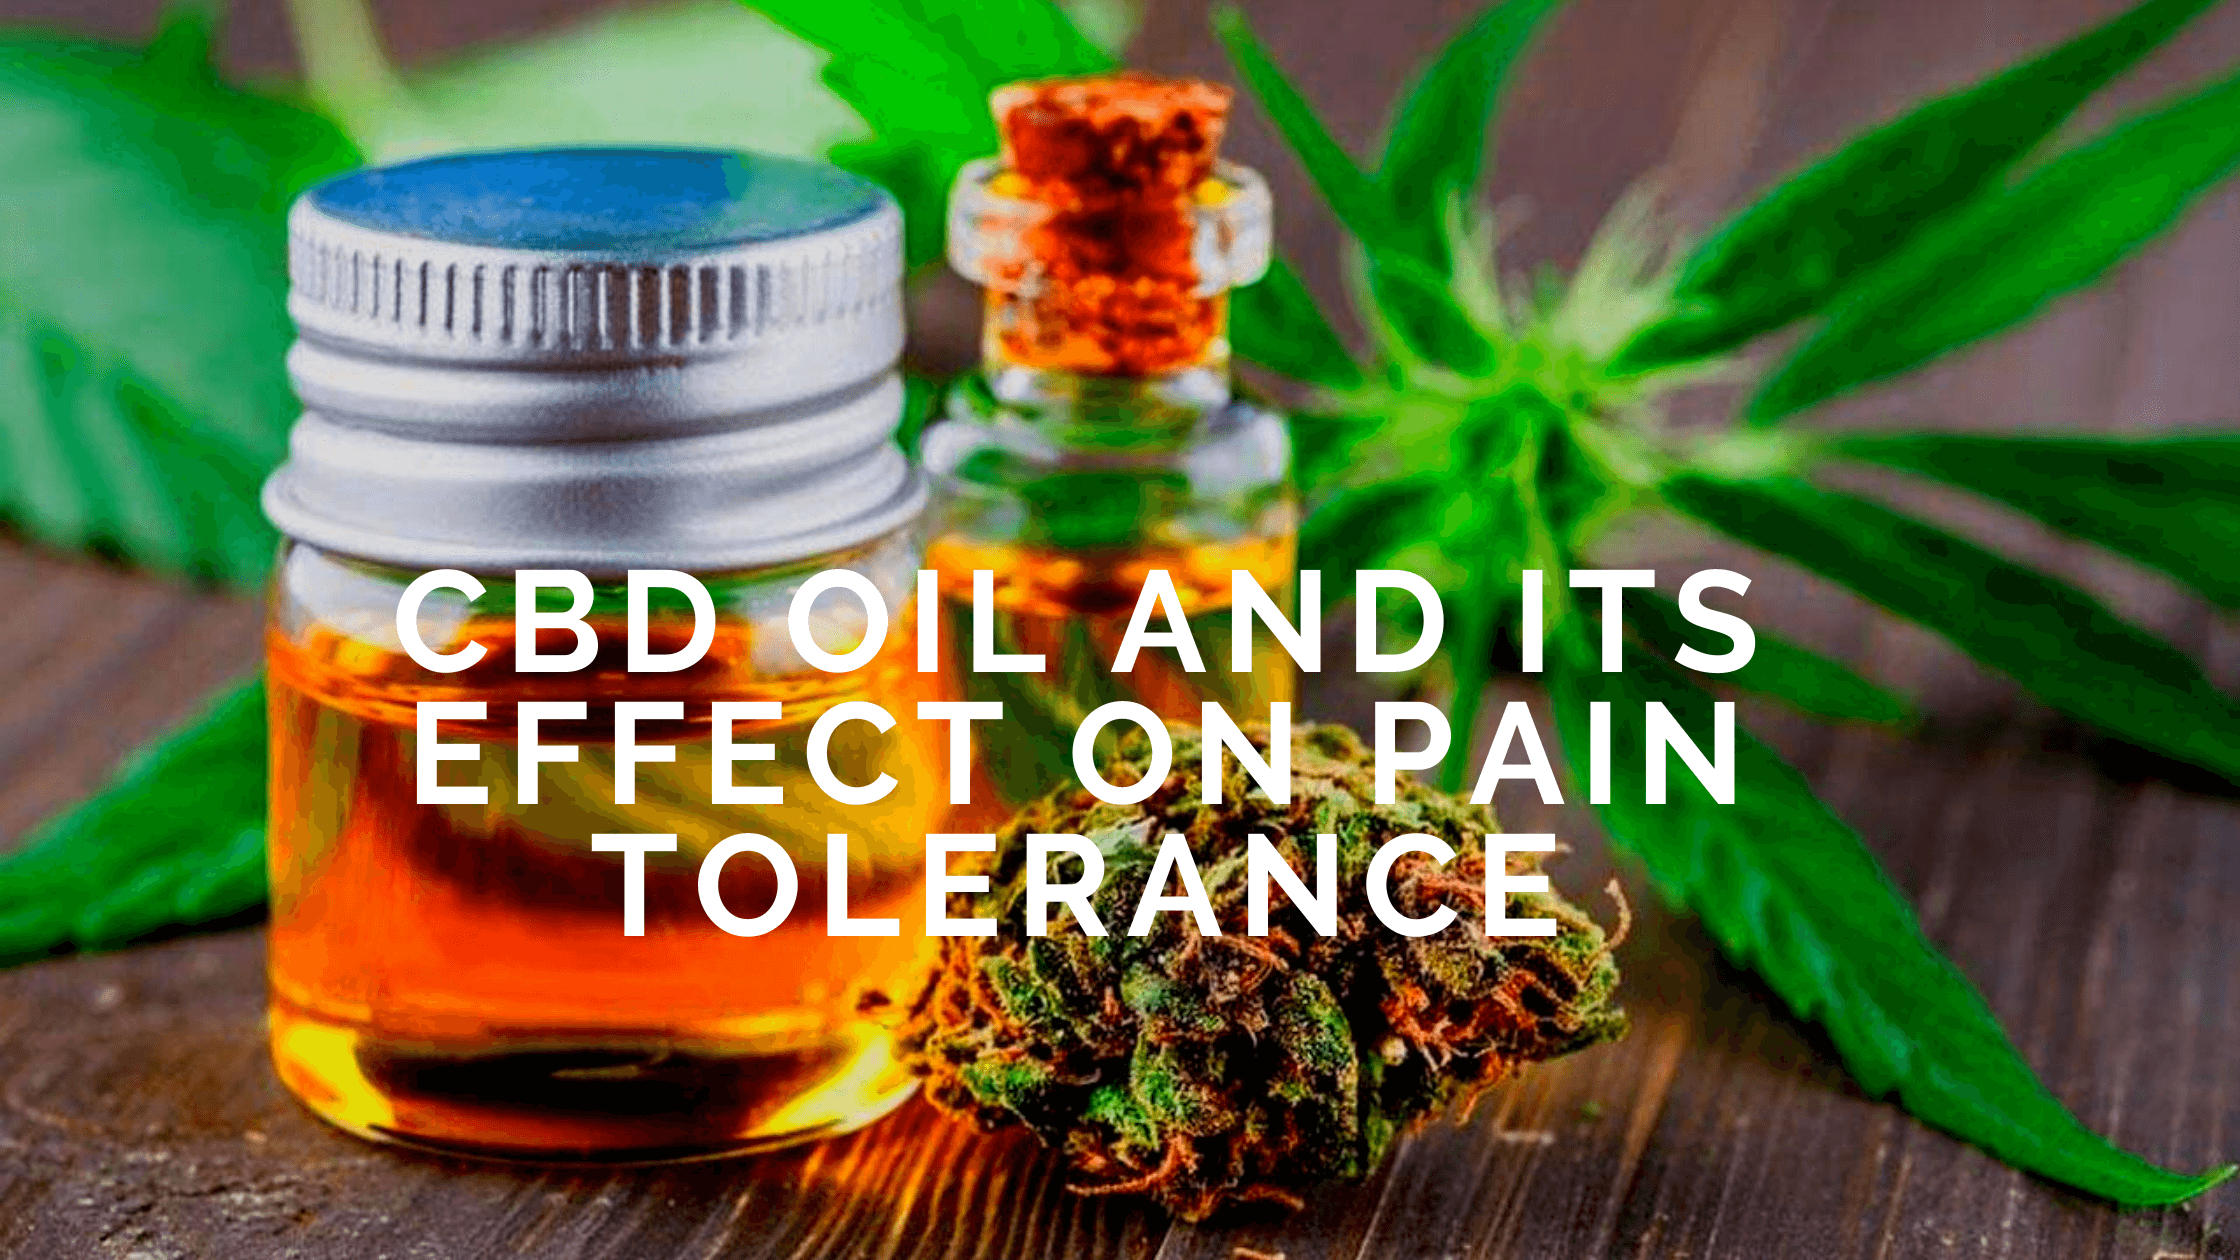 CBD OIL AND ITS EFFECT ON PAIN TOLERANCE